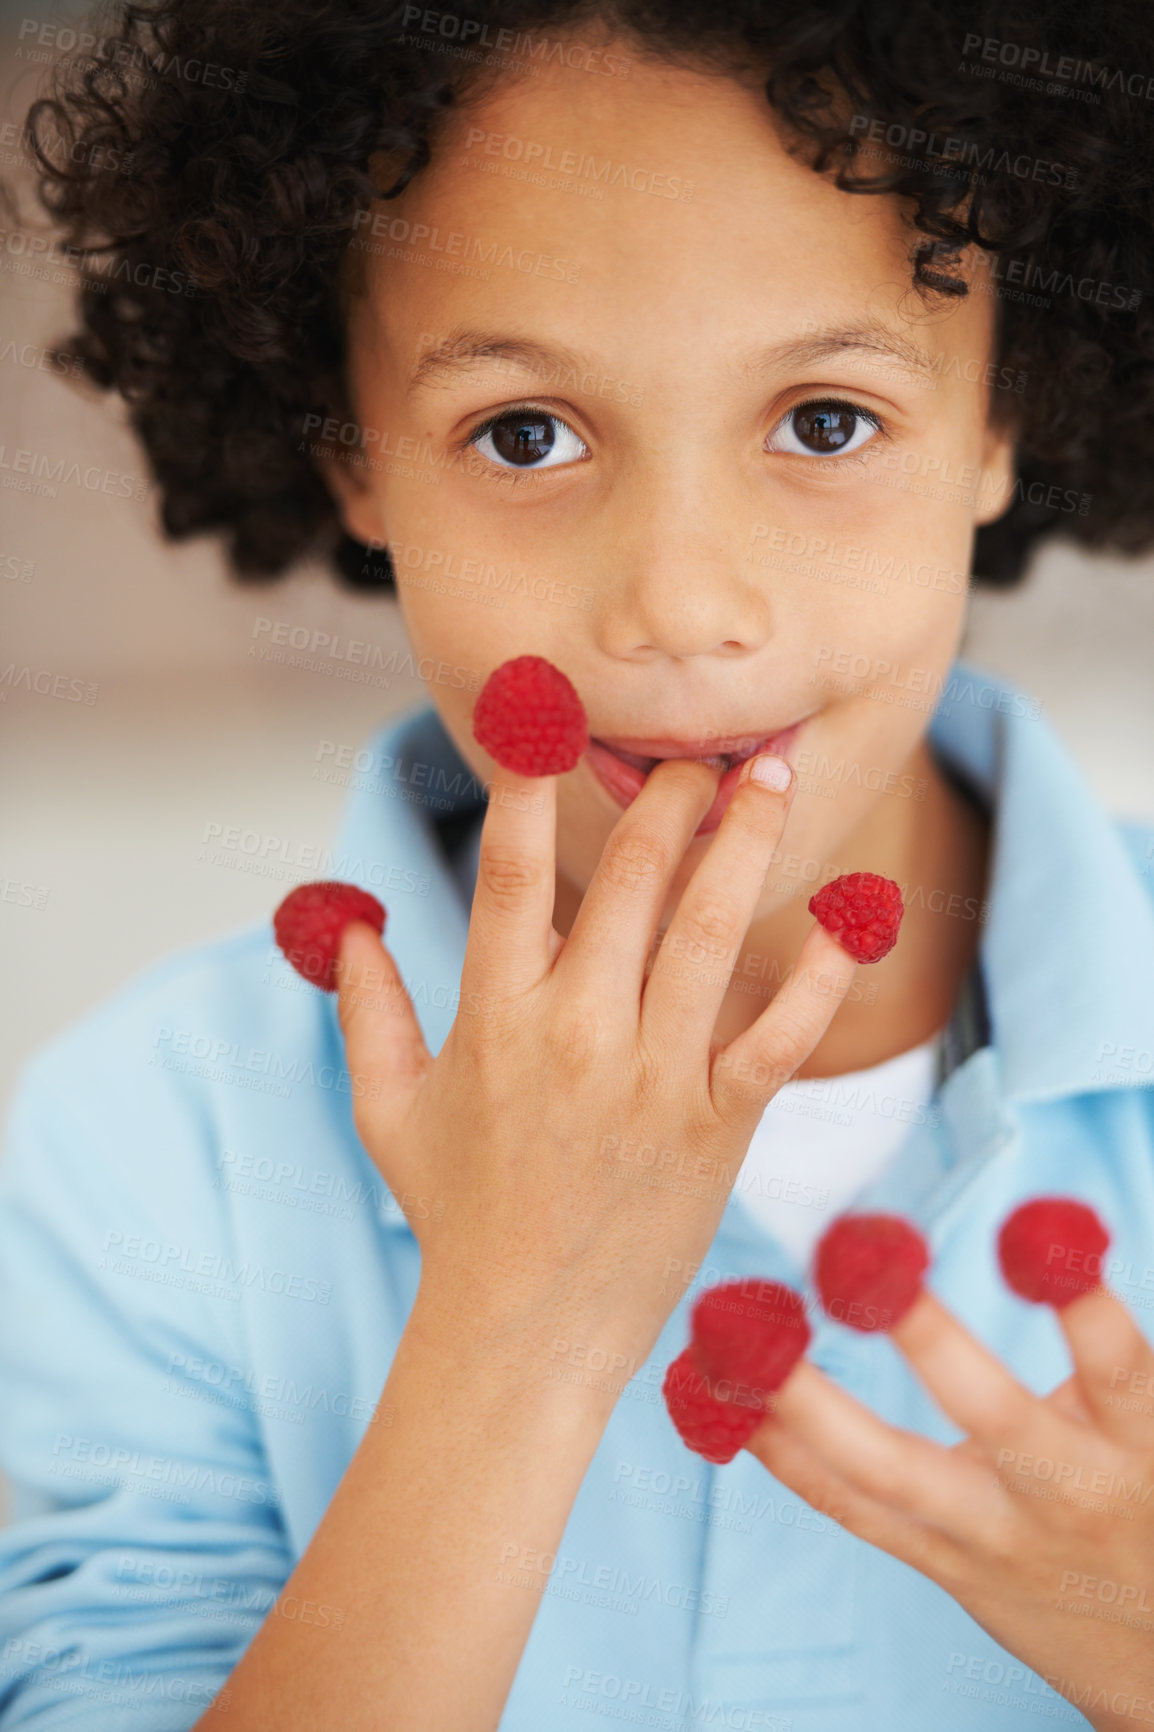 Buy stock photo Cute, portrait and boy child with raspberries at home with a health, wellness or diet snack. Smile, nutrition and young kid from Mexico eating healthy berry fruit on his fingers for a treat at home.